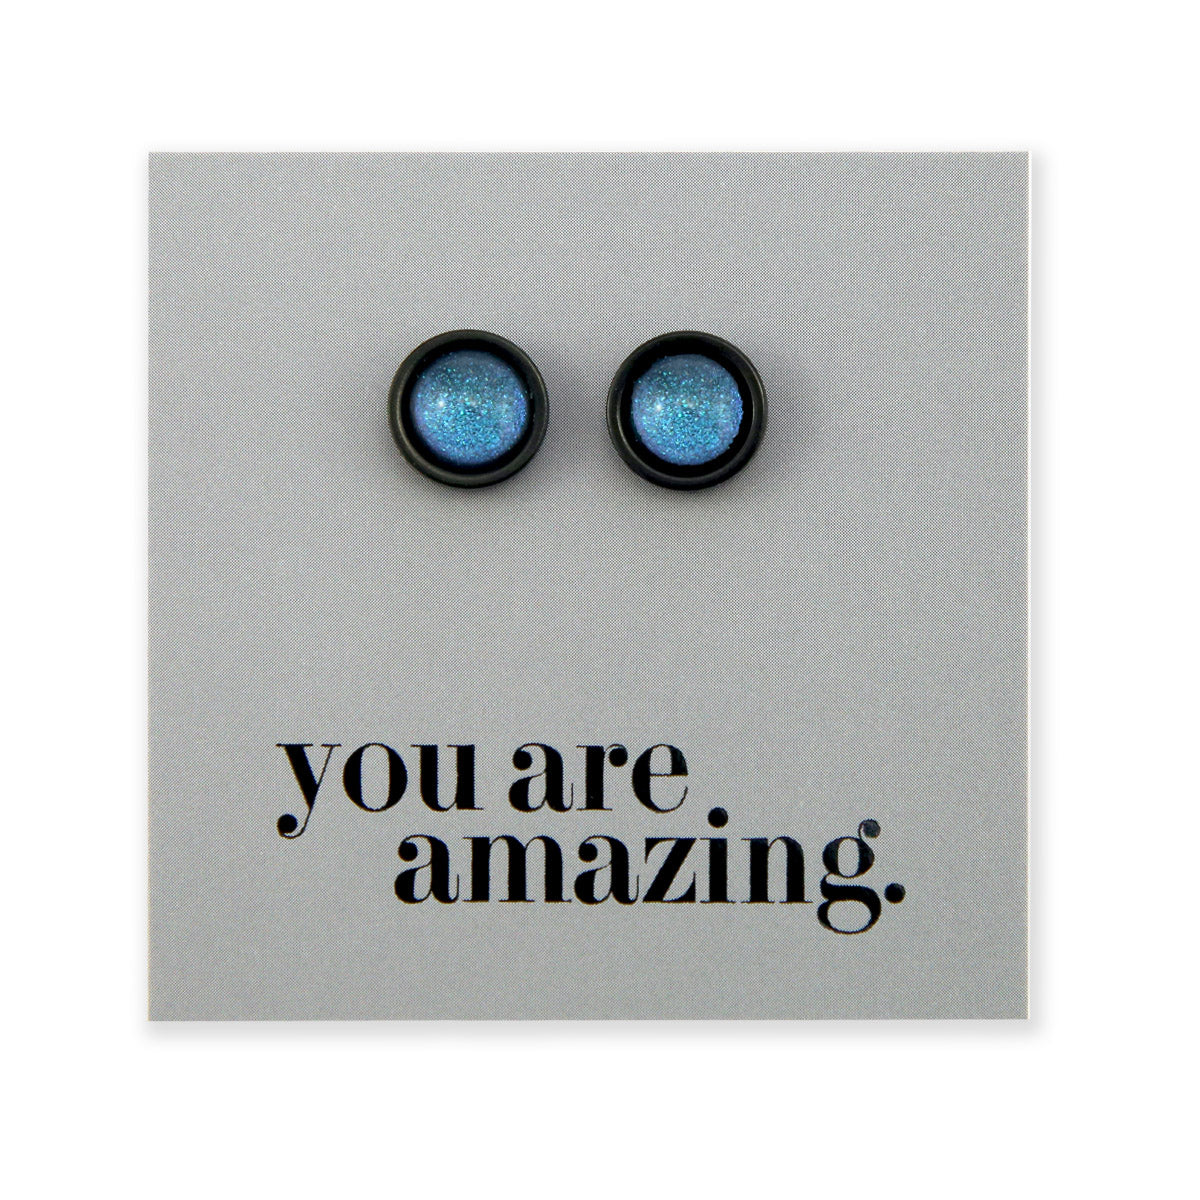 You Are Amazing - Black Stainless Steel 8mm Circle Studs - Blue Shimmer (11263)